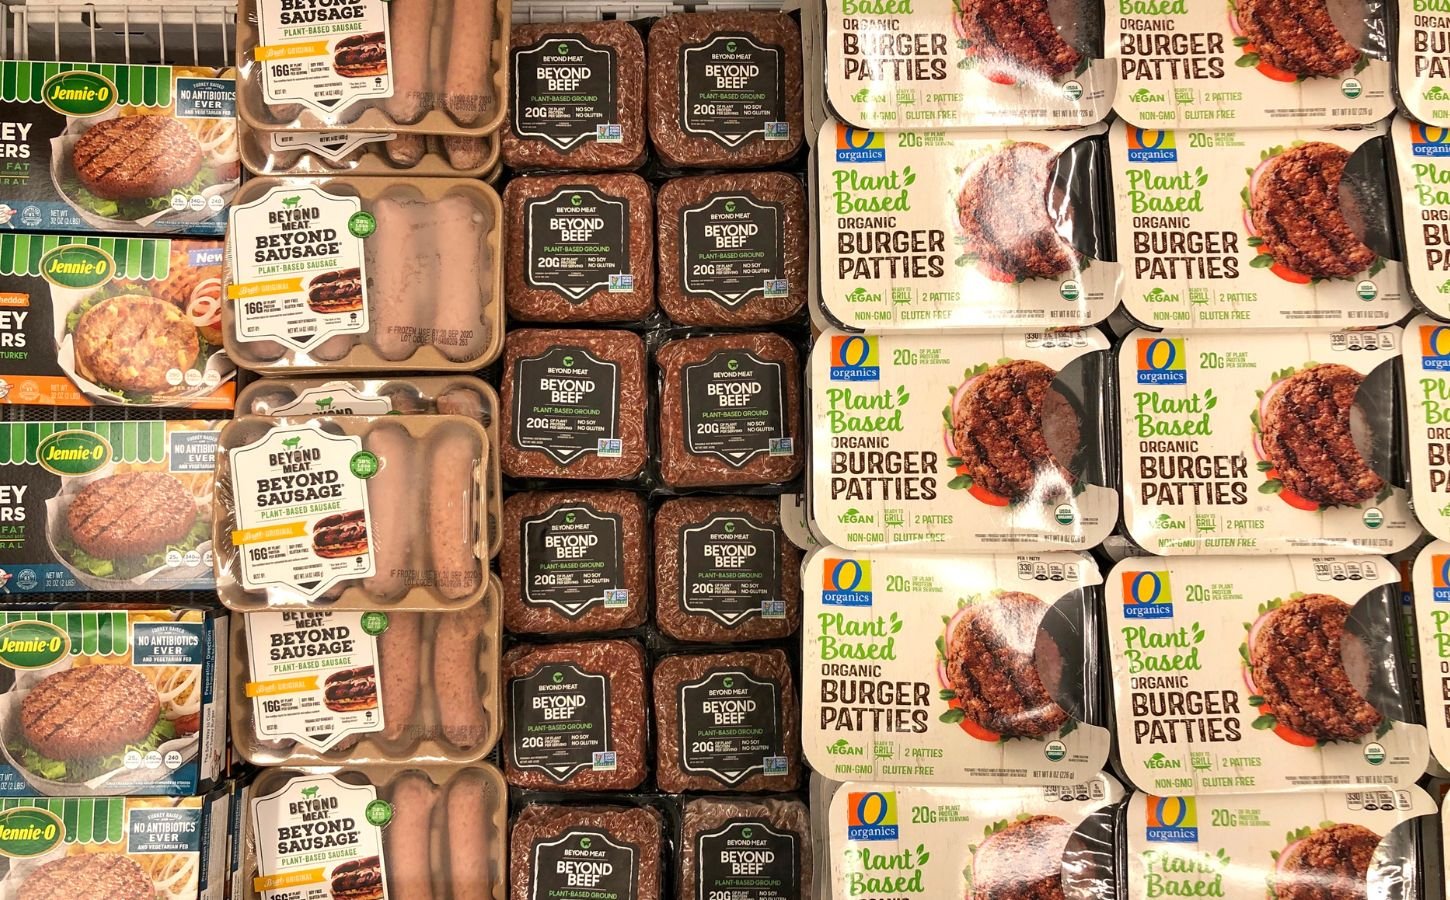 Plant-based meat products